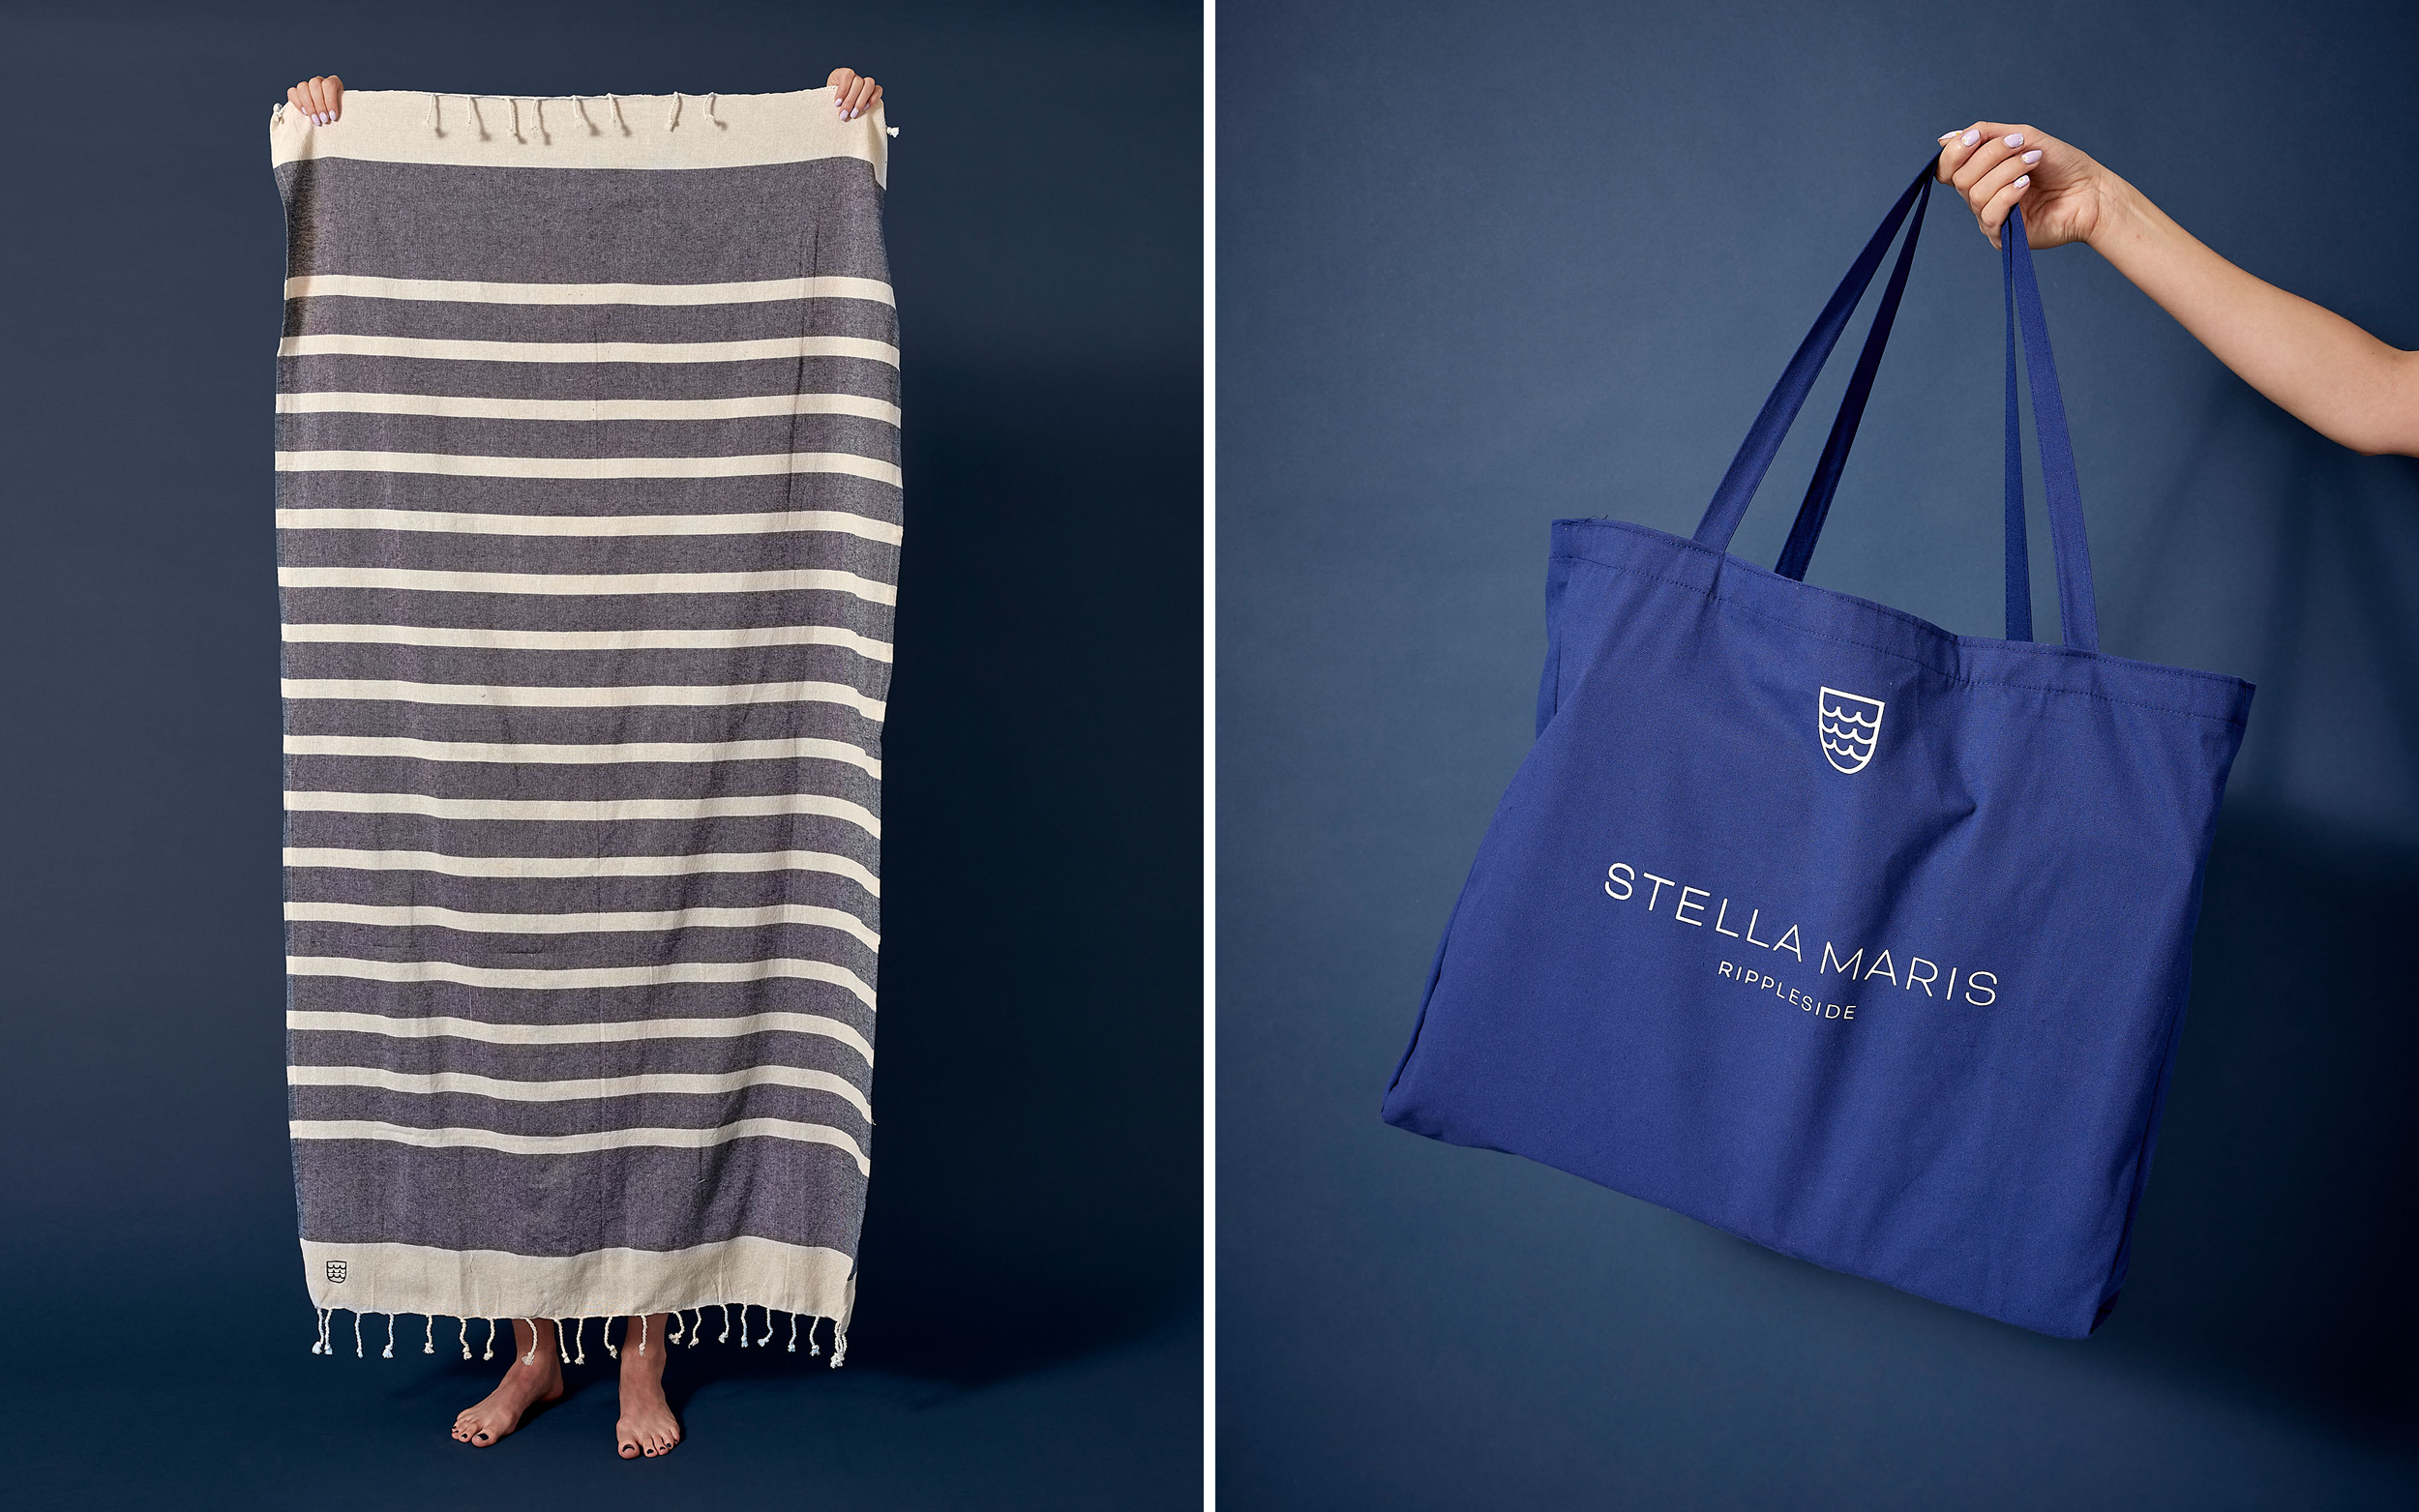 branded towel and tote bag, blue and cream striped